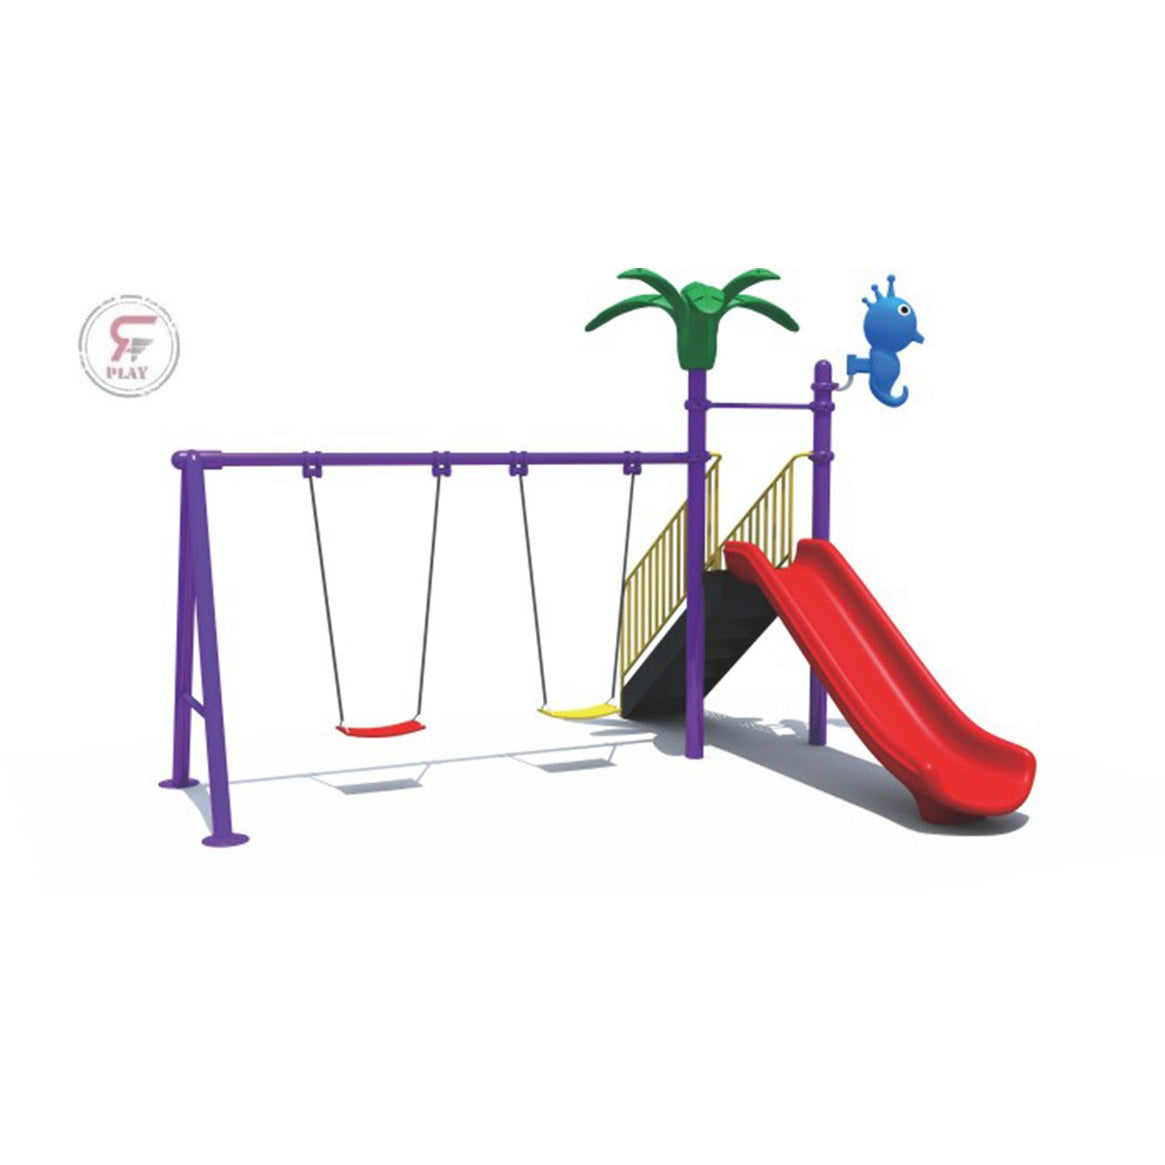 Outdoor Metal Shine n shine Play Twin Swings and slide With stairs